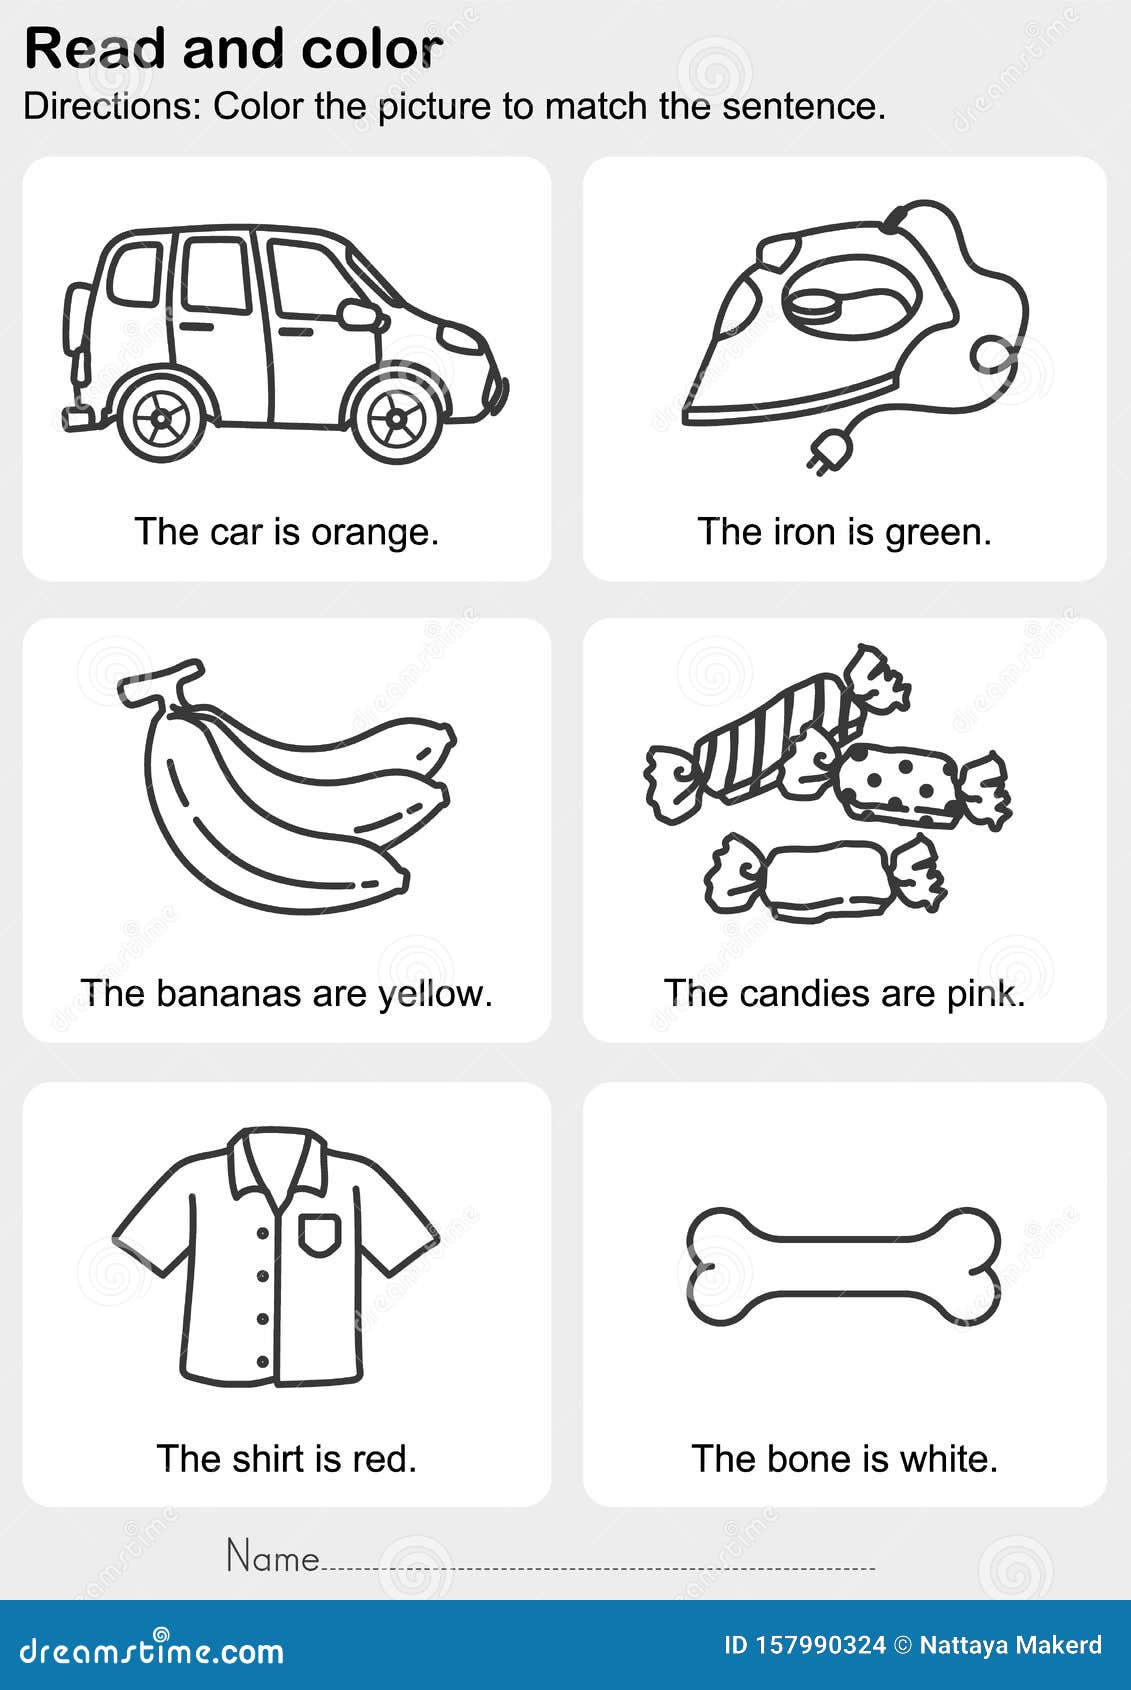 read and color : color the picture to match the sentence